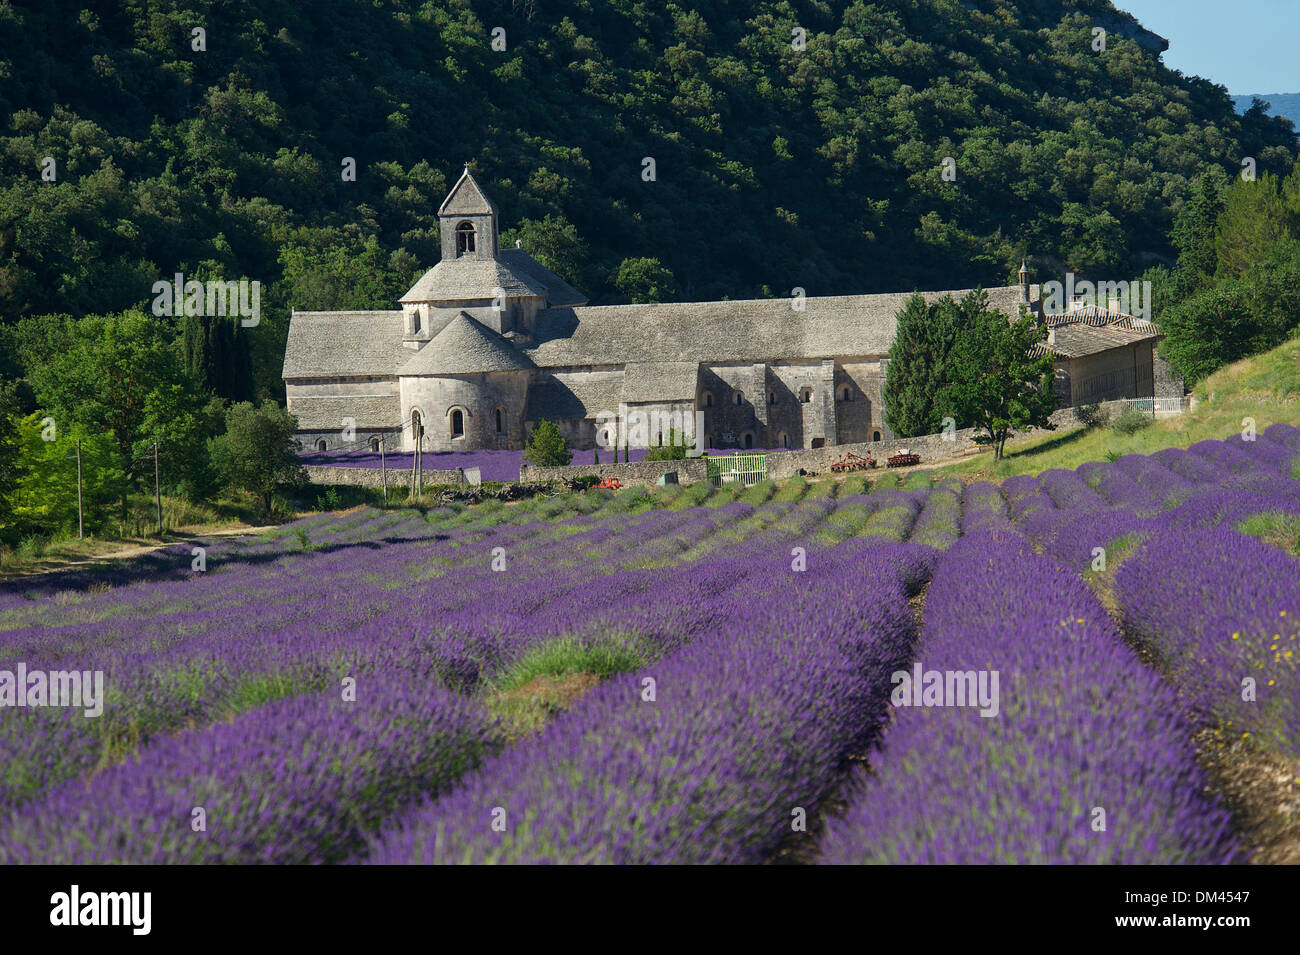 France Europe Provence South of France lavender lavender blossom lavender field lavender fields scenery landscape agriculture Stock Photo